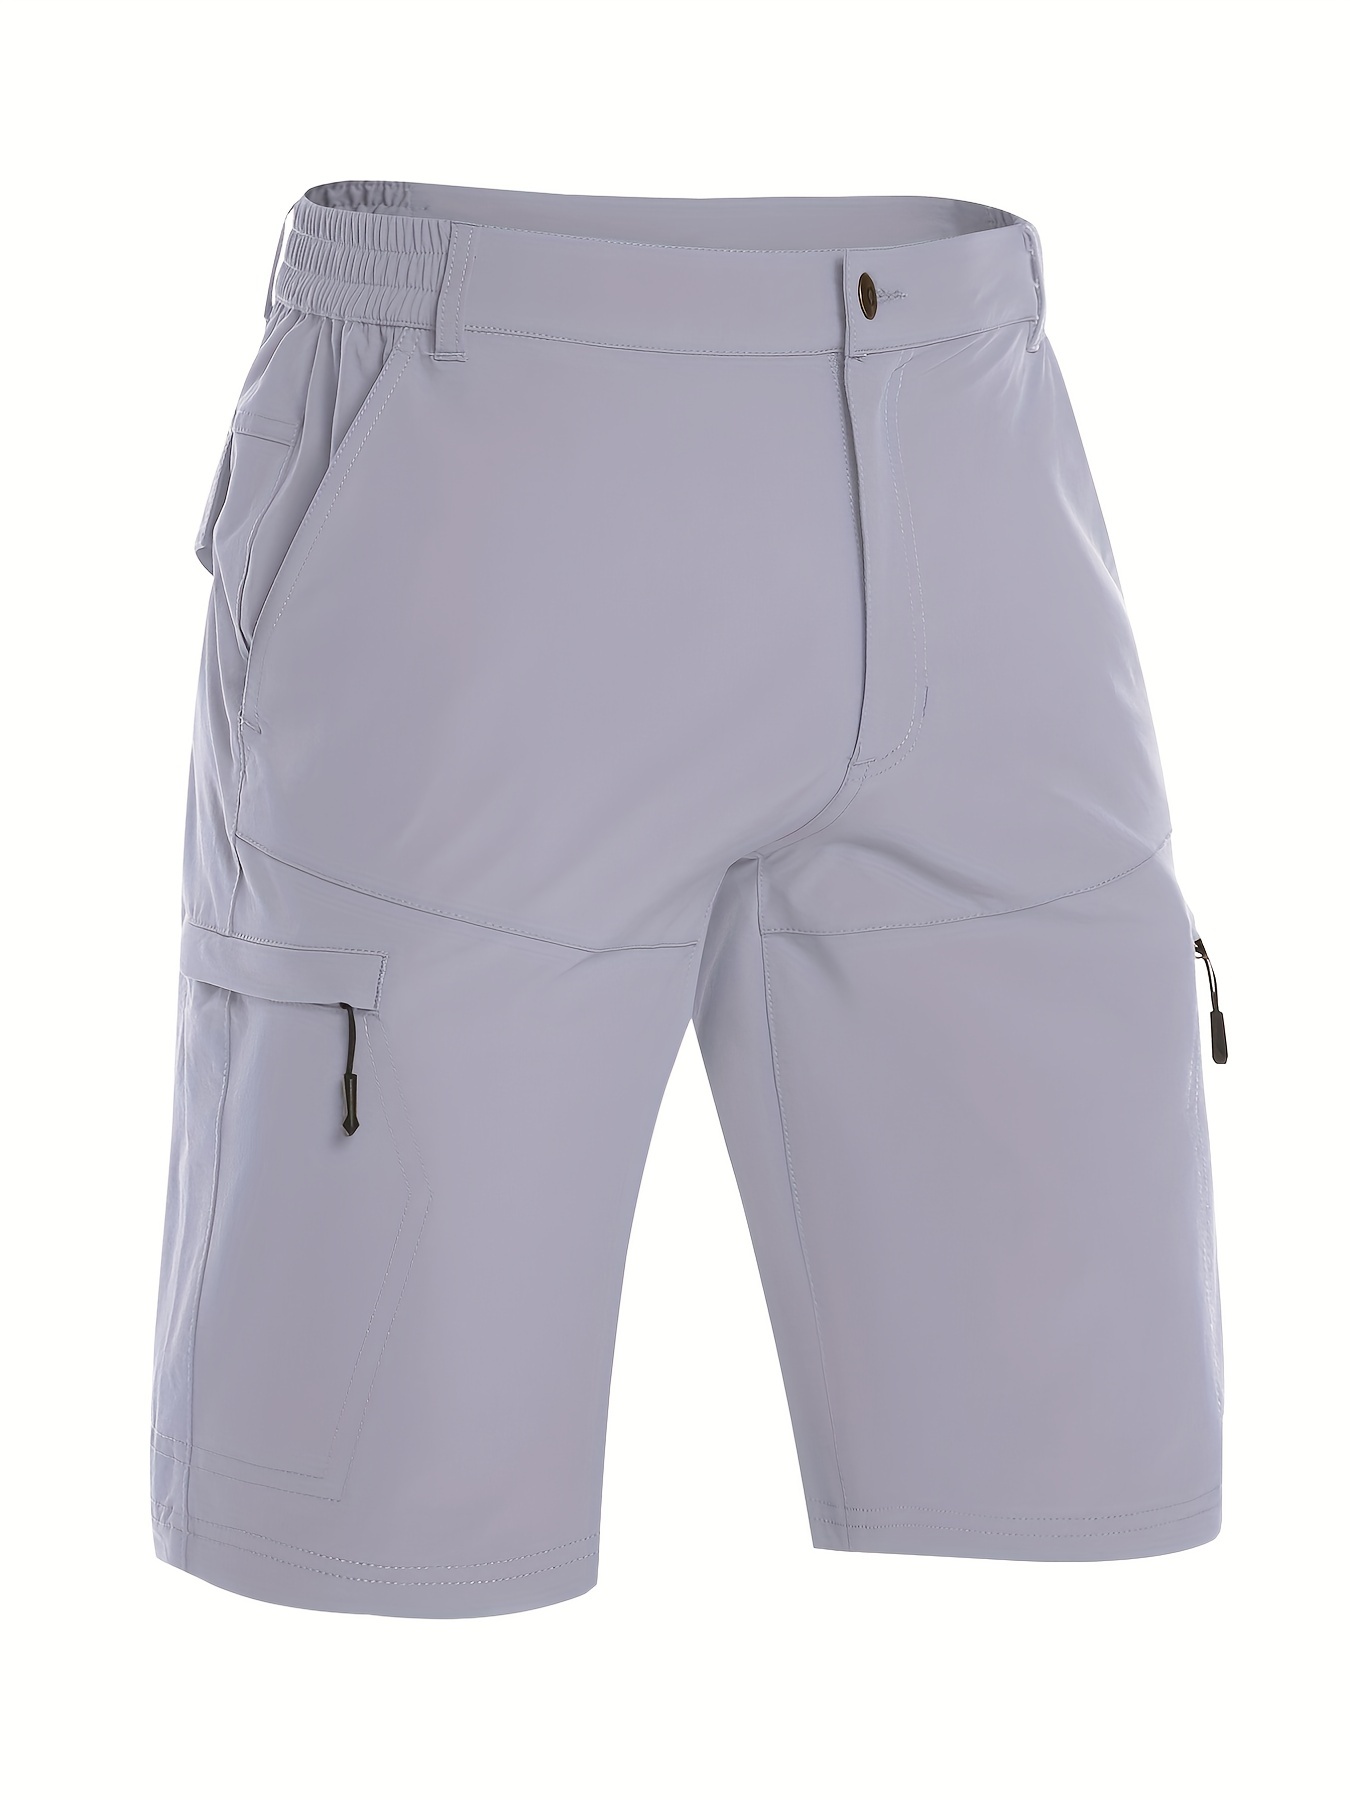 mens stylish multi pocket golf shorts perfect for outdoor adventures